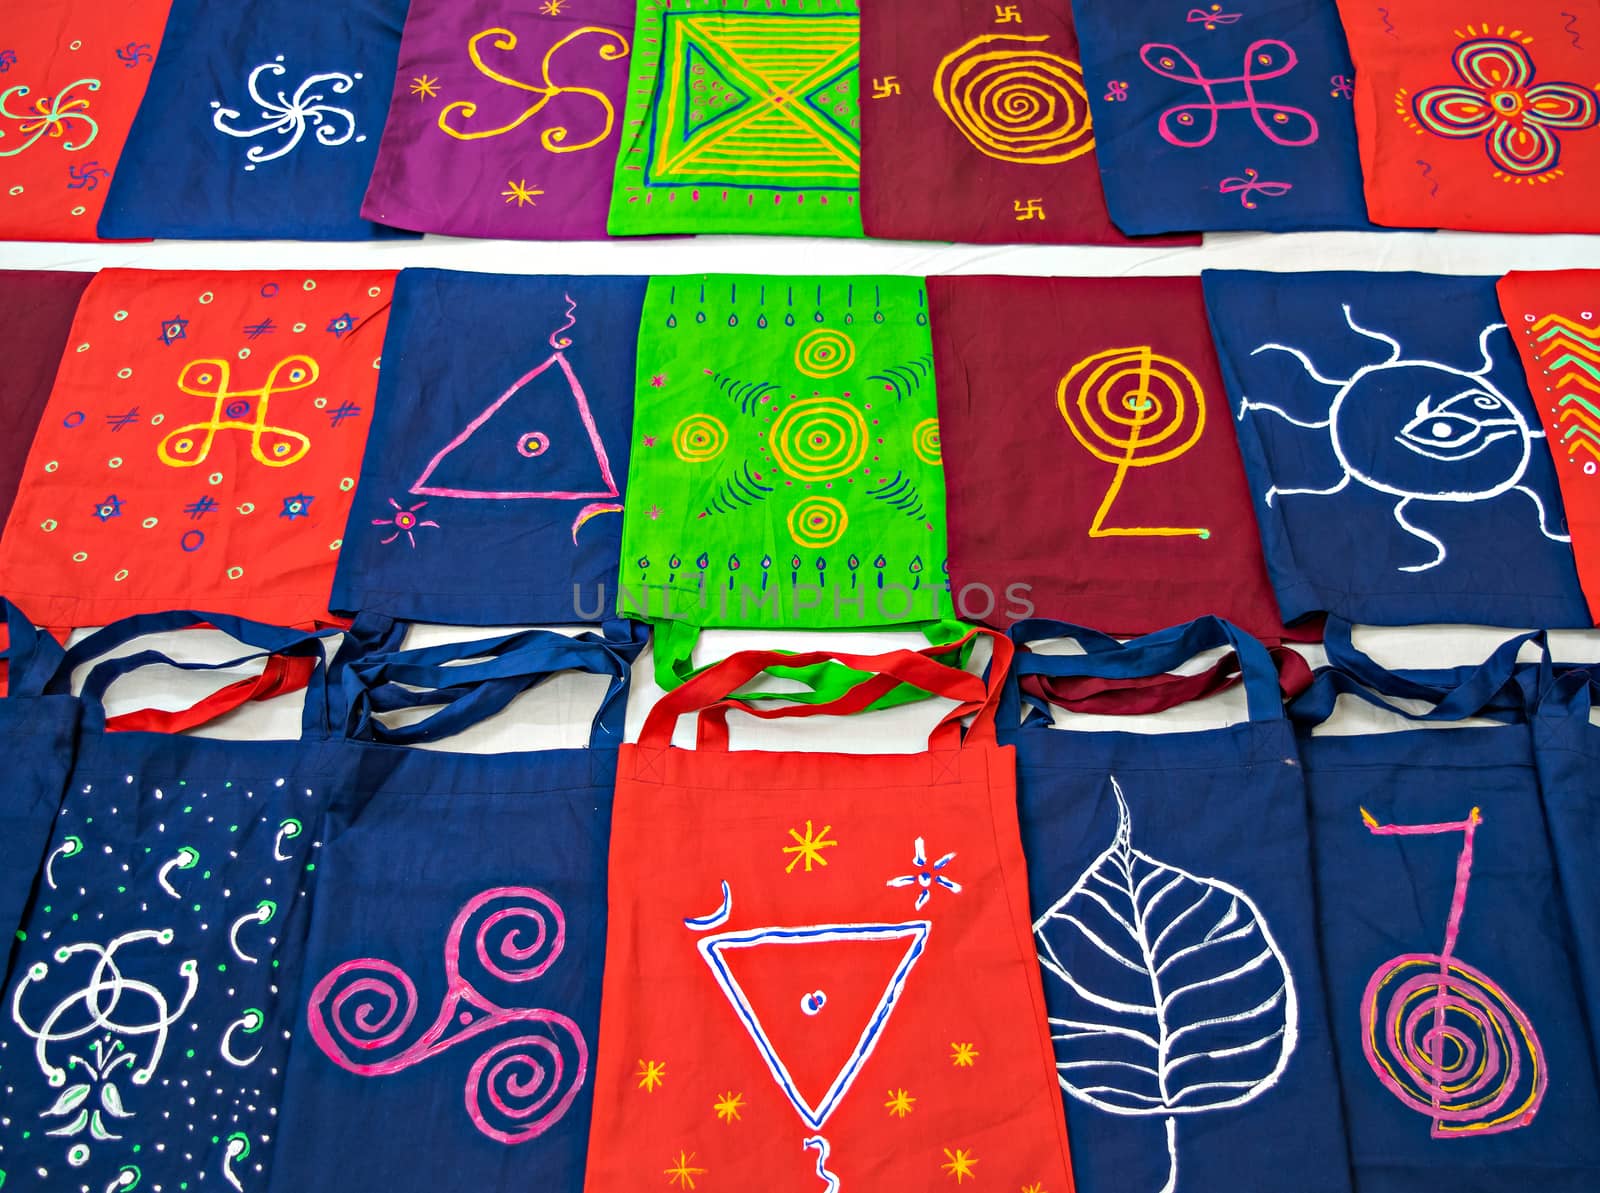 Colorful cotton bags with hand painted symbols arranged in pattern. by lalam